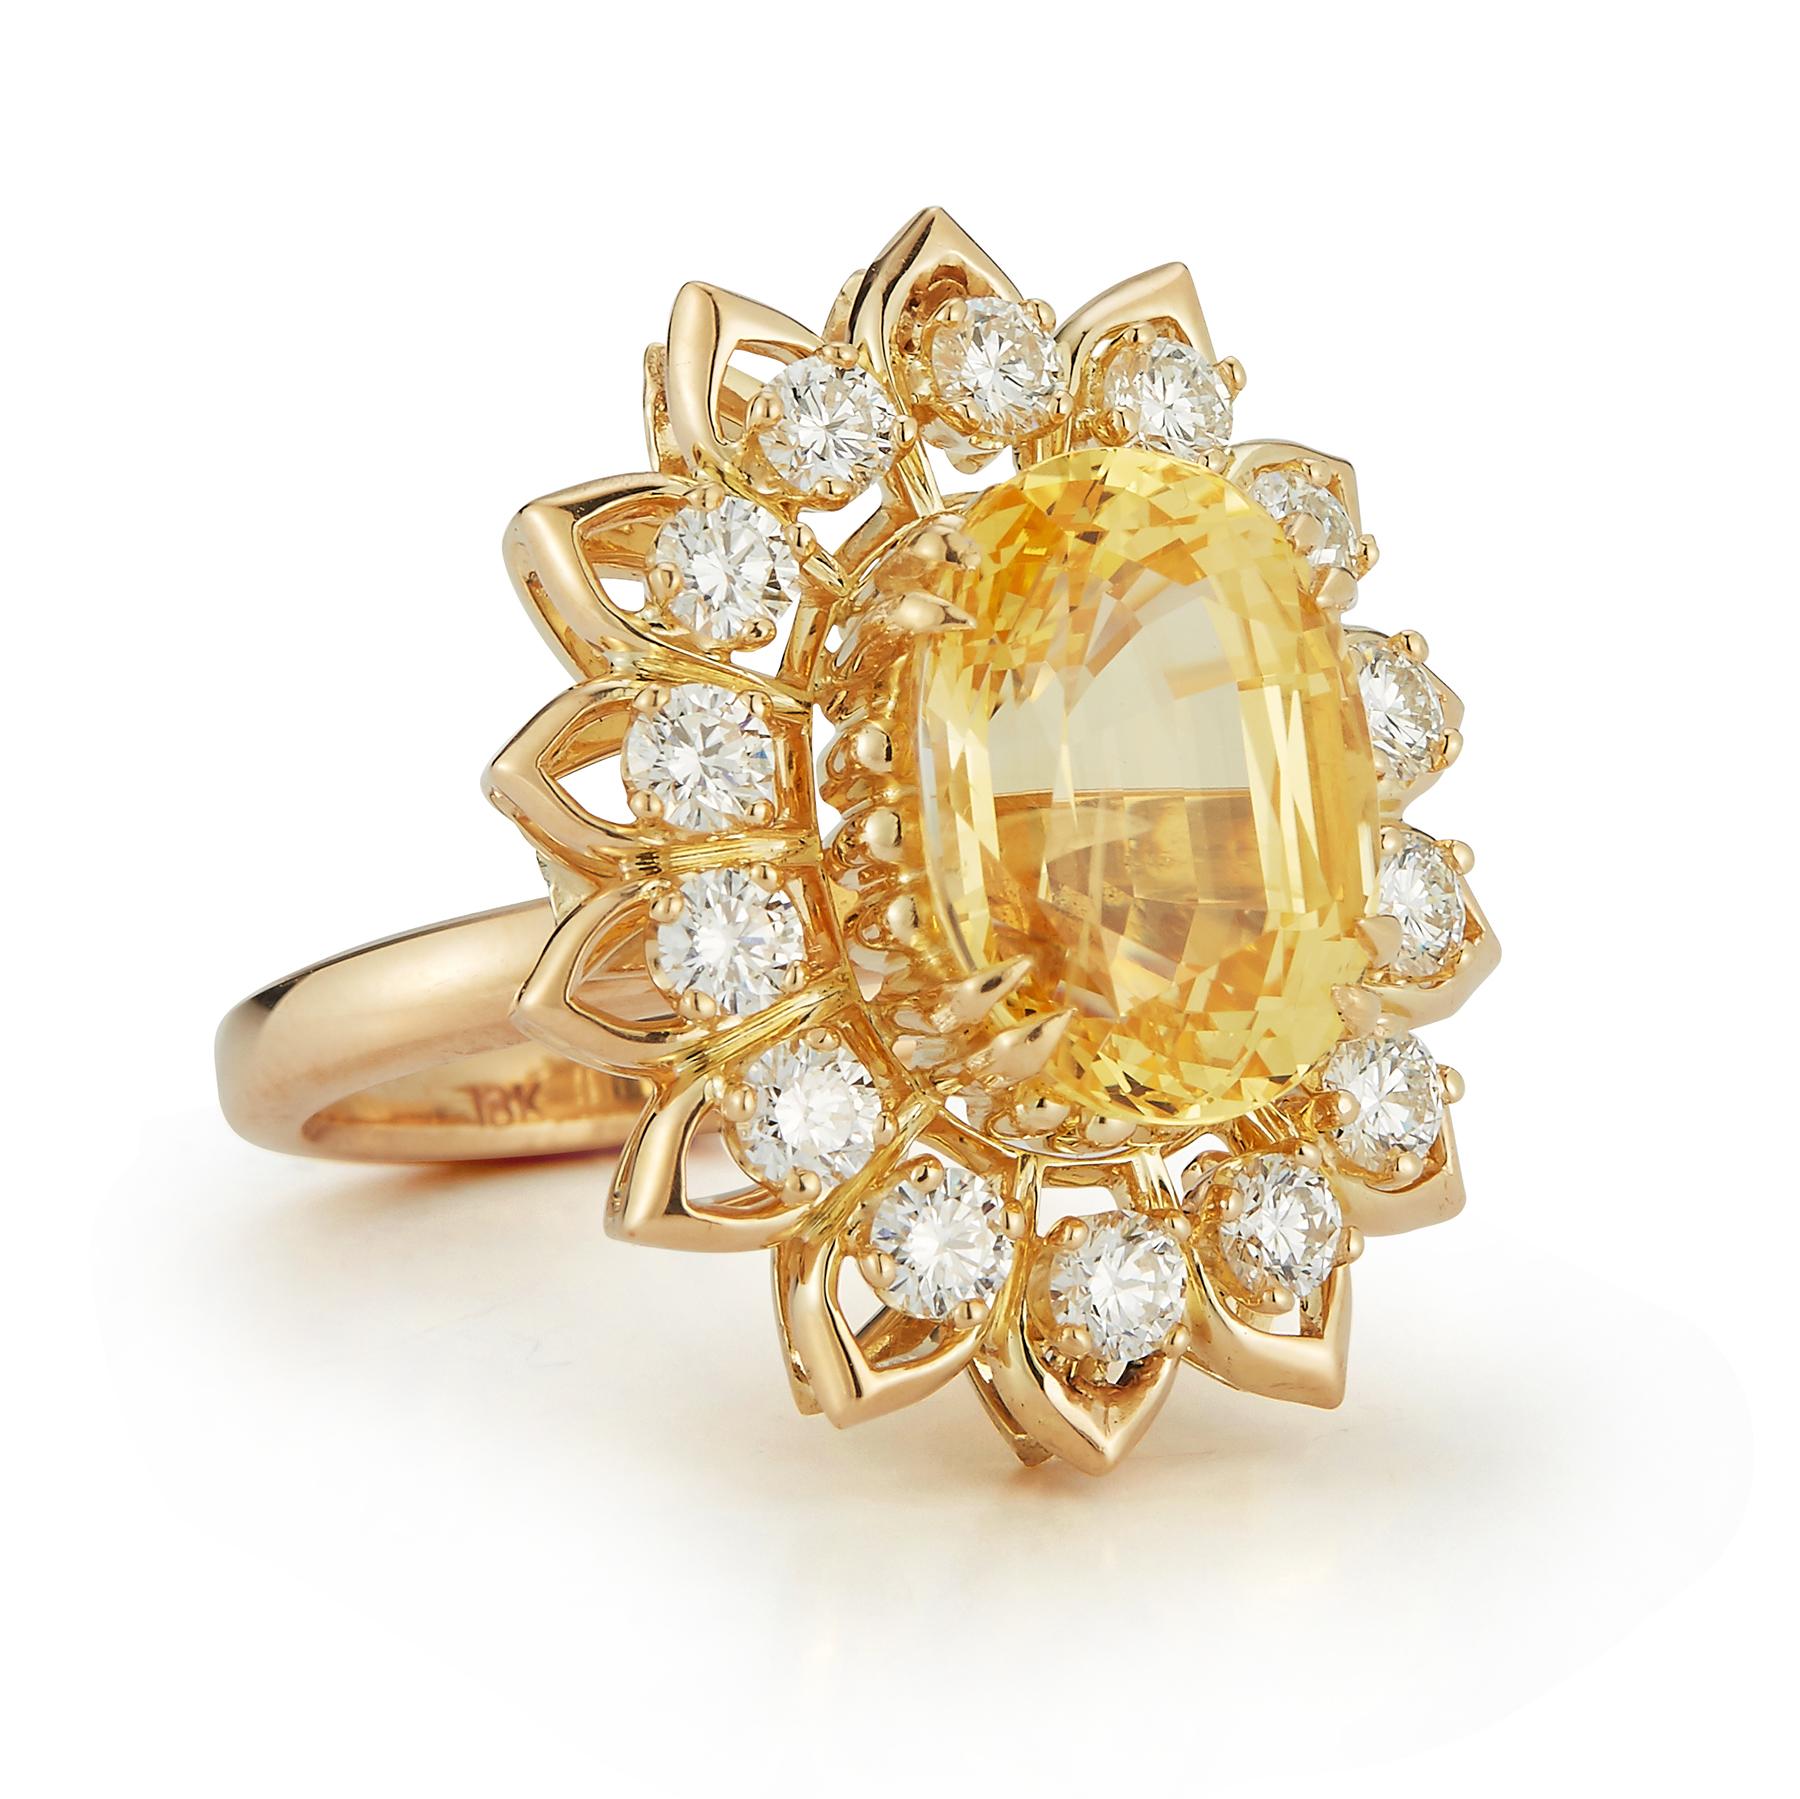 Oval Cut Yellow Sapphire & Diamond Flower Cocktail Ring 1 large oval cut yellow sapphire surrounded by 14 round cut diamonds set in 18k yellow gold

Ring Size: 6 

Re sizable free of charge 